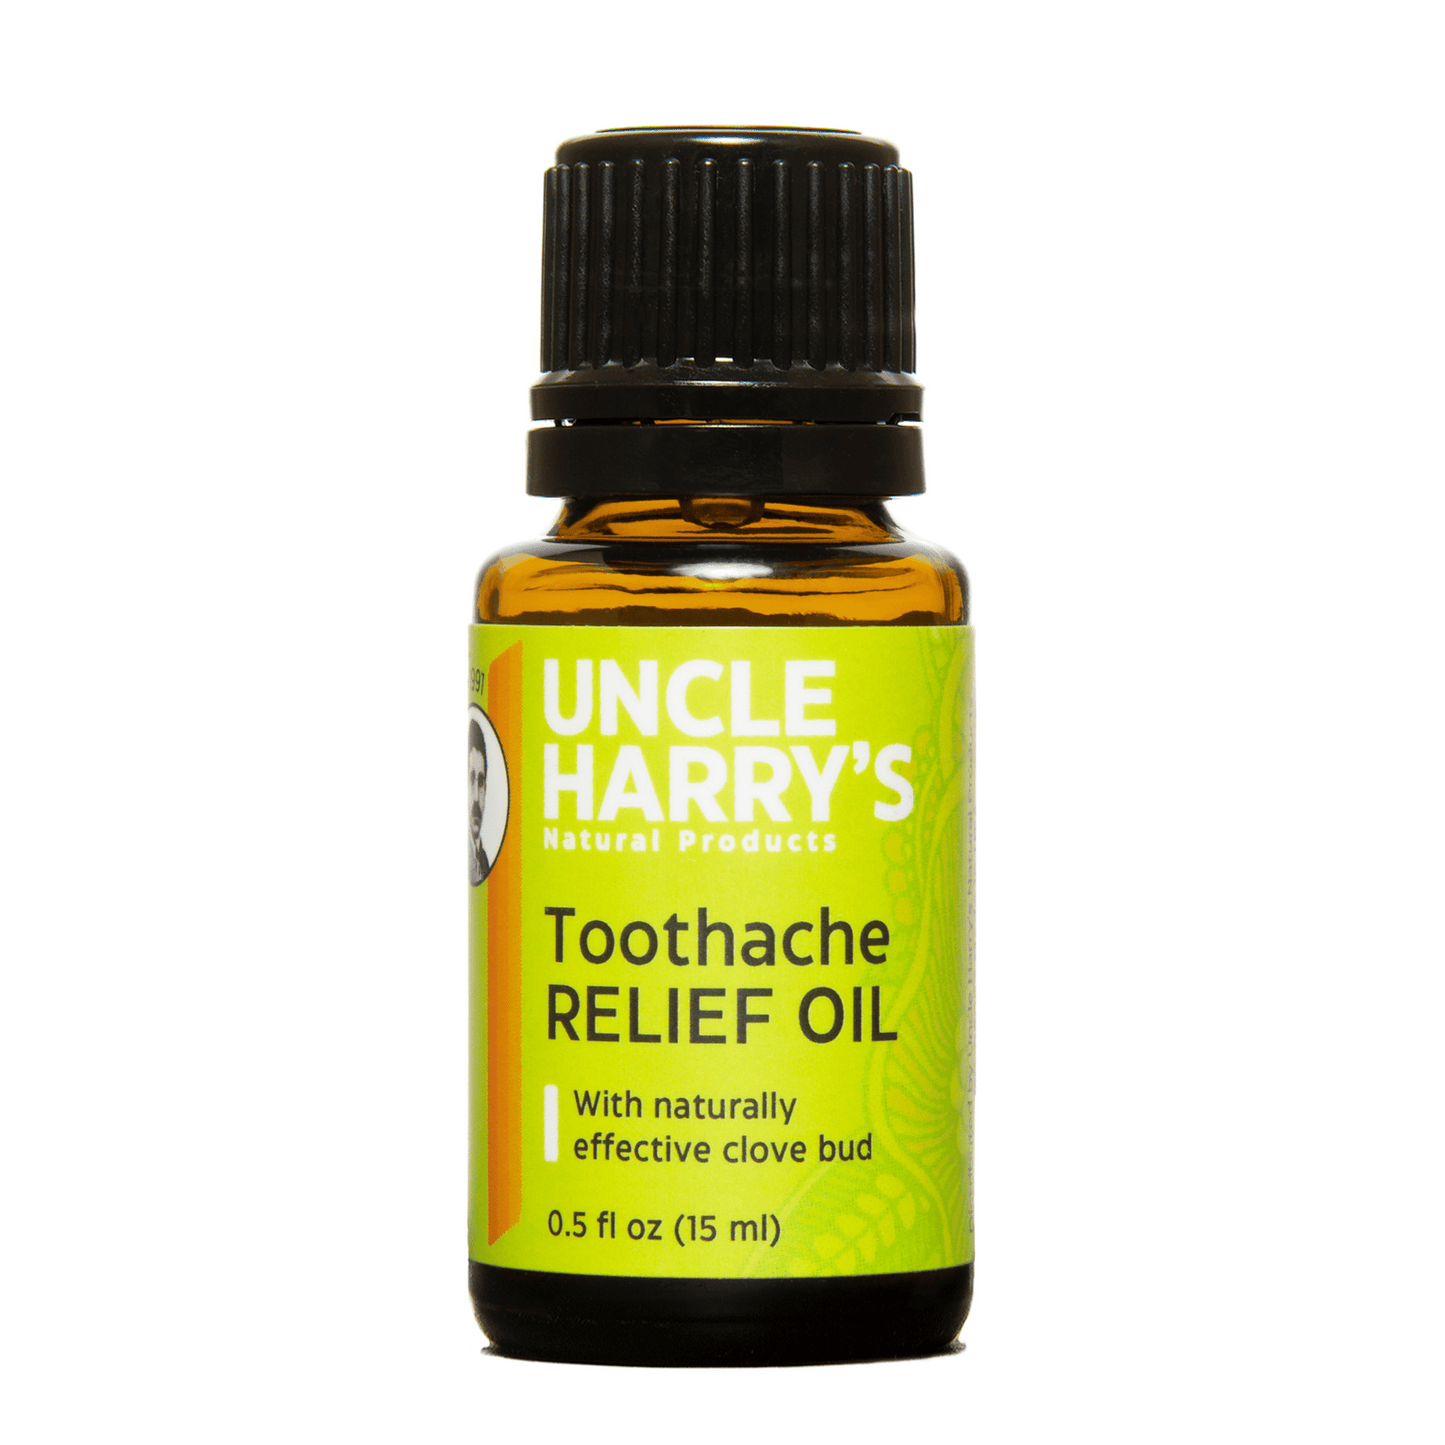 Primary Image of Toothache Relief Oil